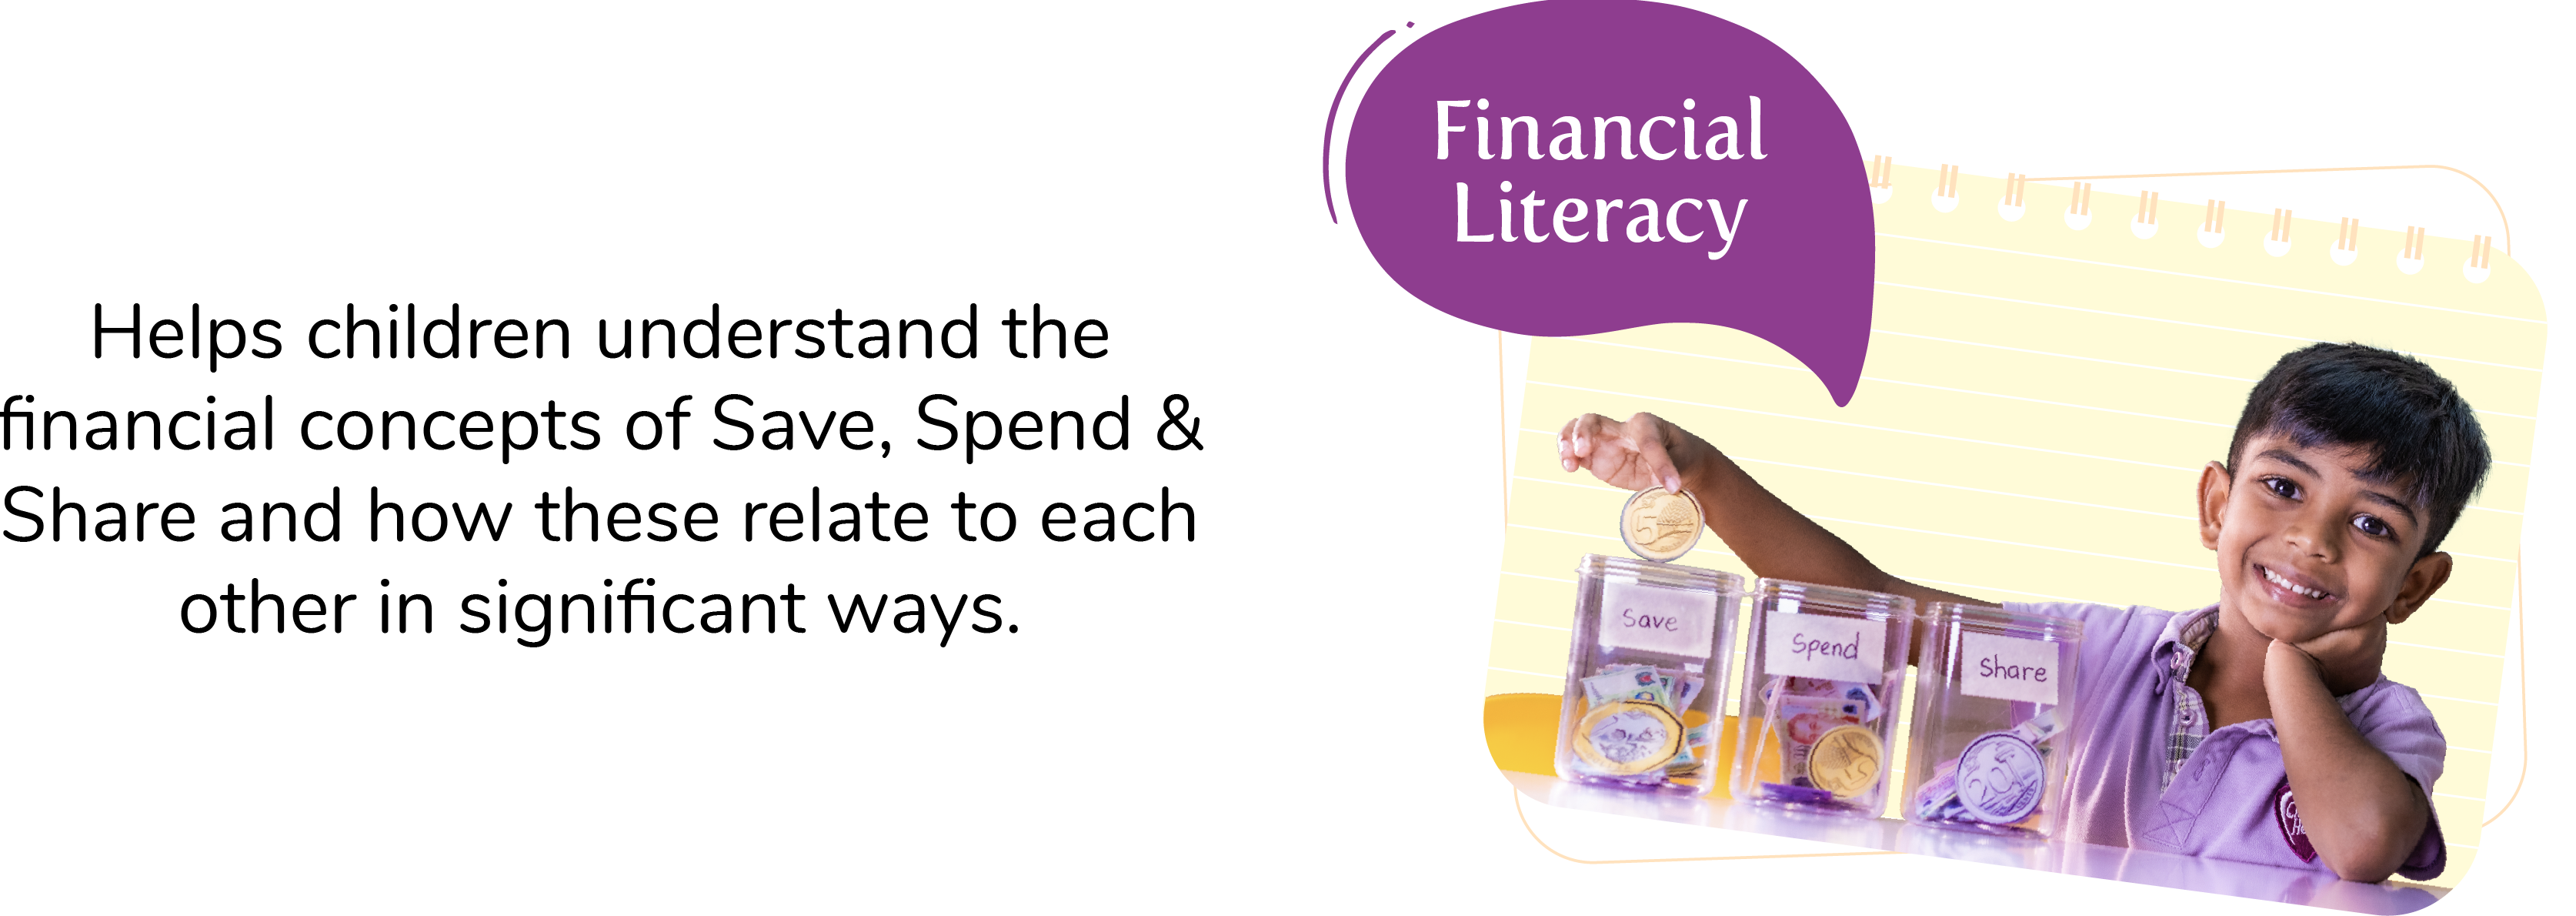 Helps children understand the financial concepts of Save, Spend & Share and how these relate to each other in significant ways.